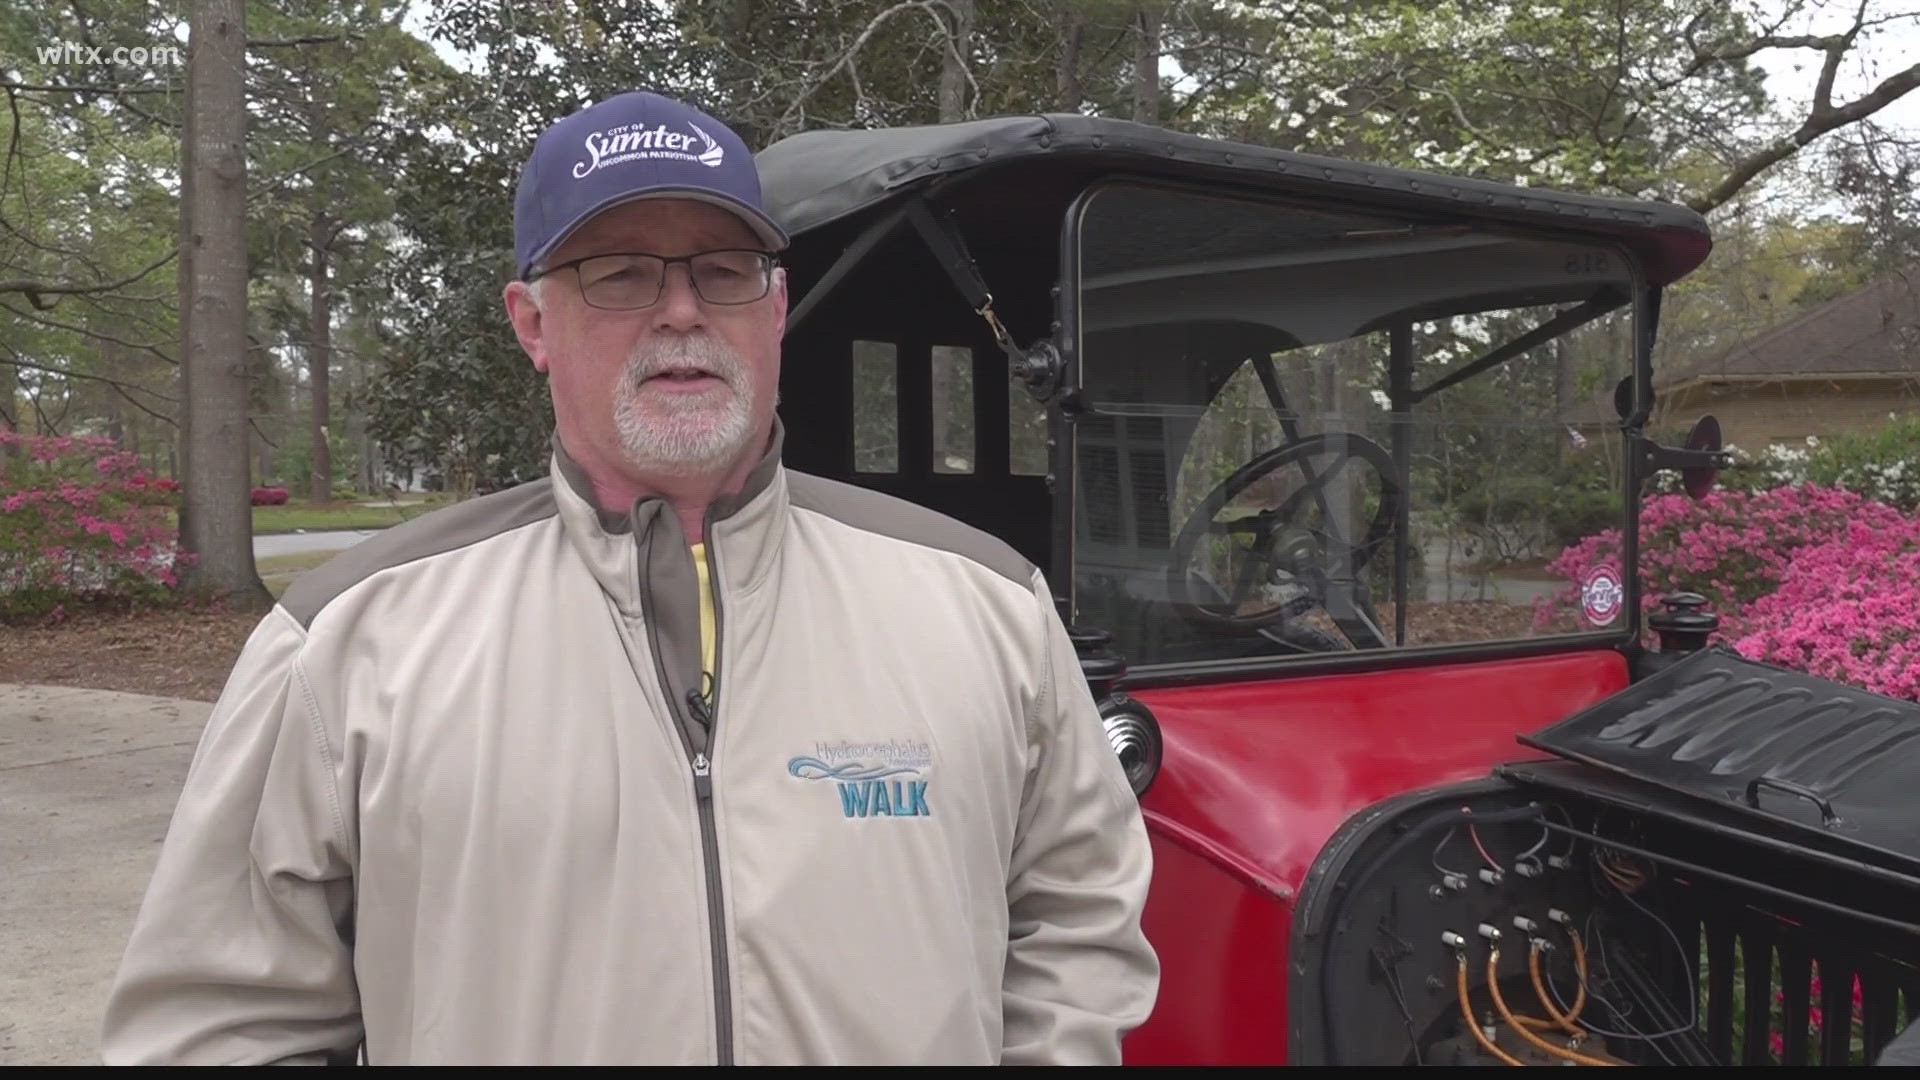 Todd Touchberry is fixing up his 1920 Ford Model T to drive it coast to coast. He's hoping to raise money for hydrocephalus, a brain disorder his daughter has.